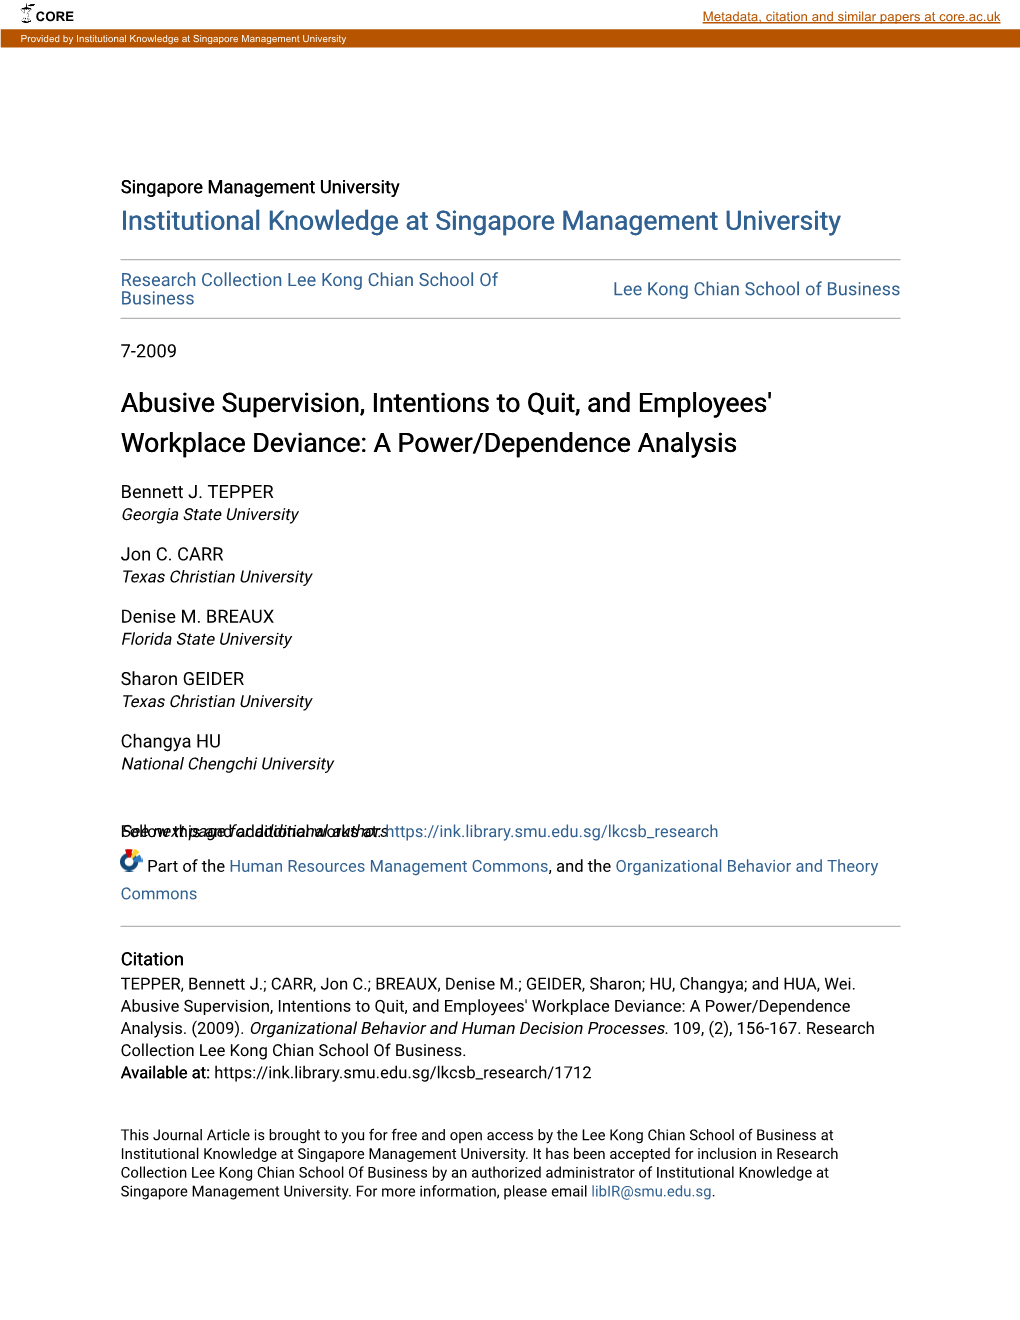 Abusive Supervision, Intentions to Quit, and Employees' Workplace Deviance: a Power/Dependence Analysis